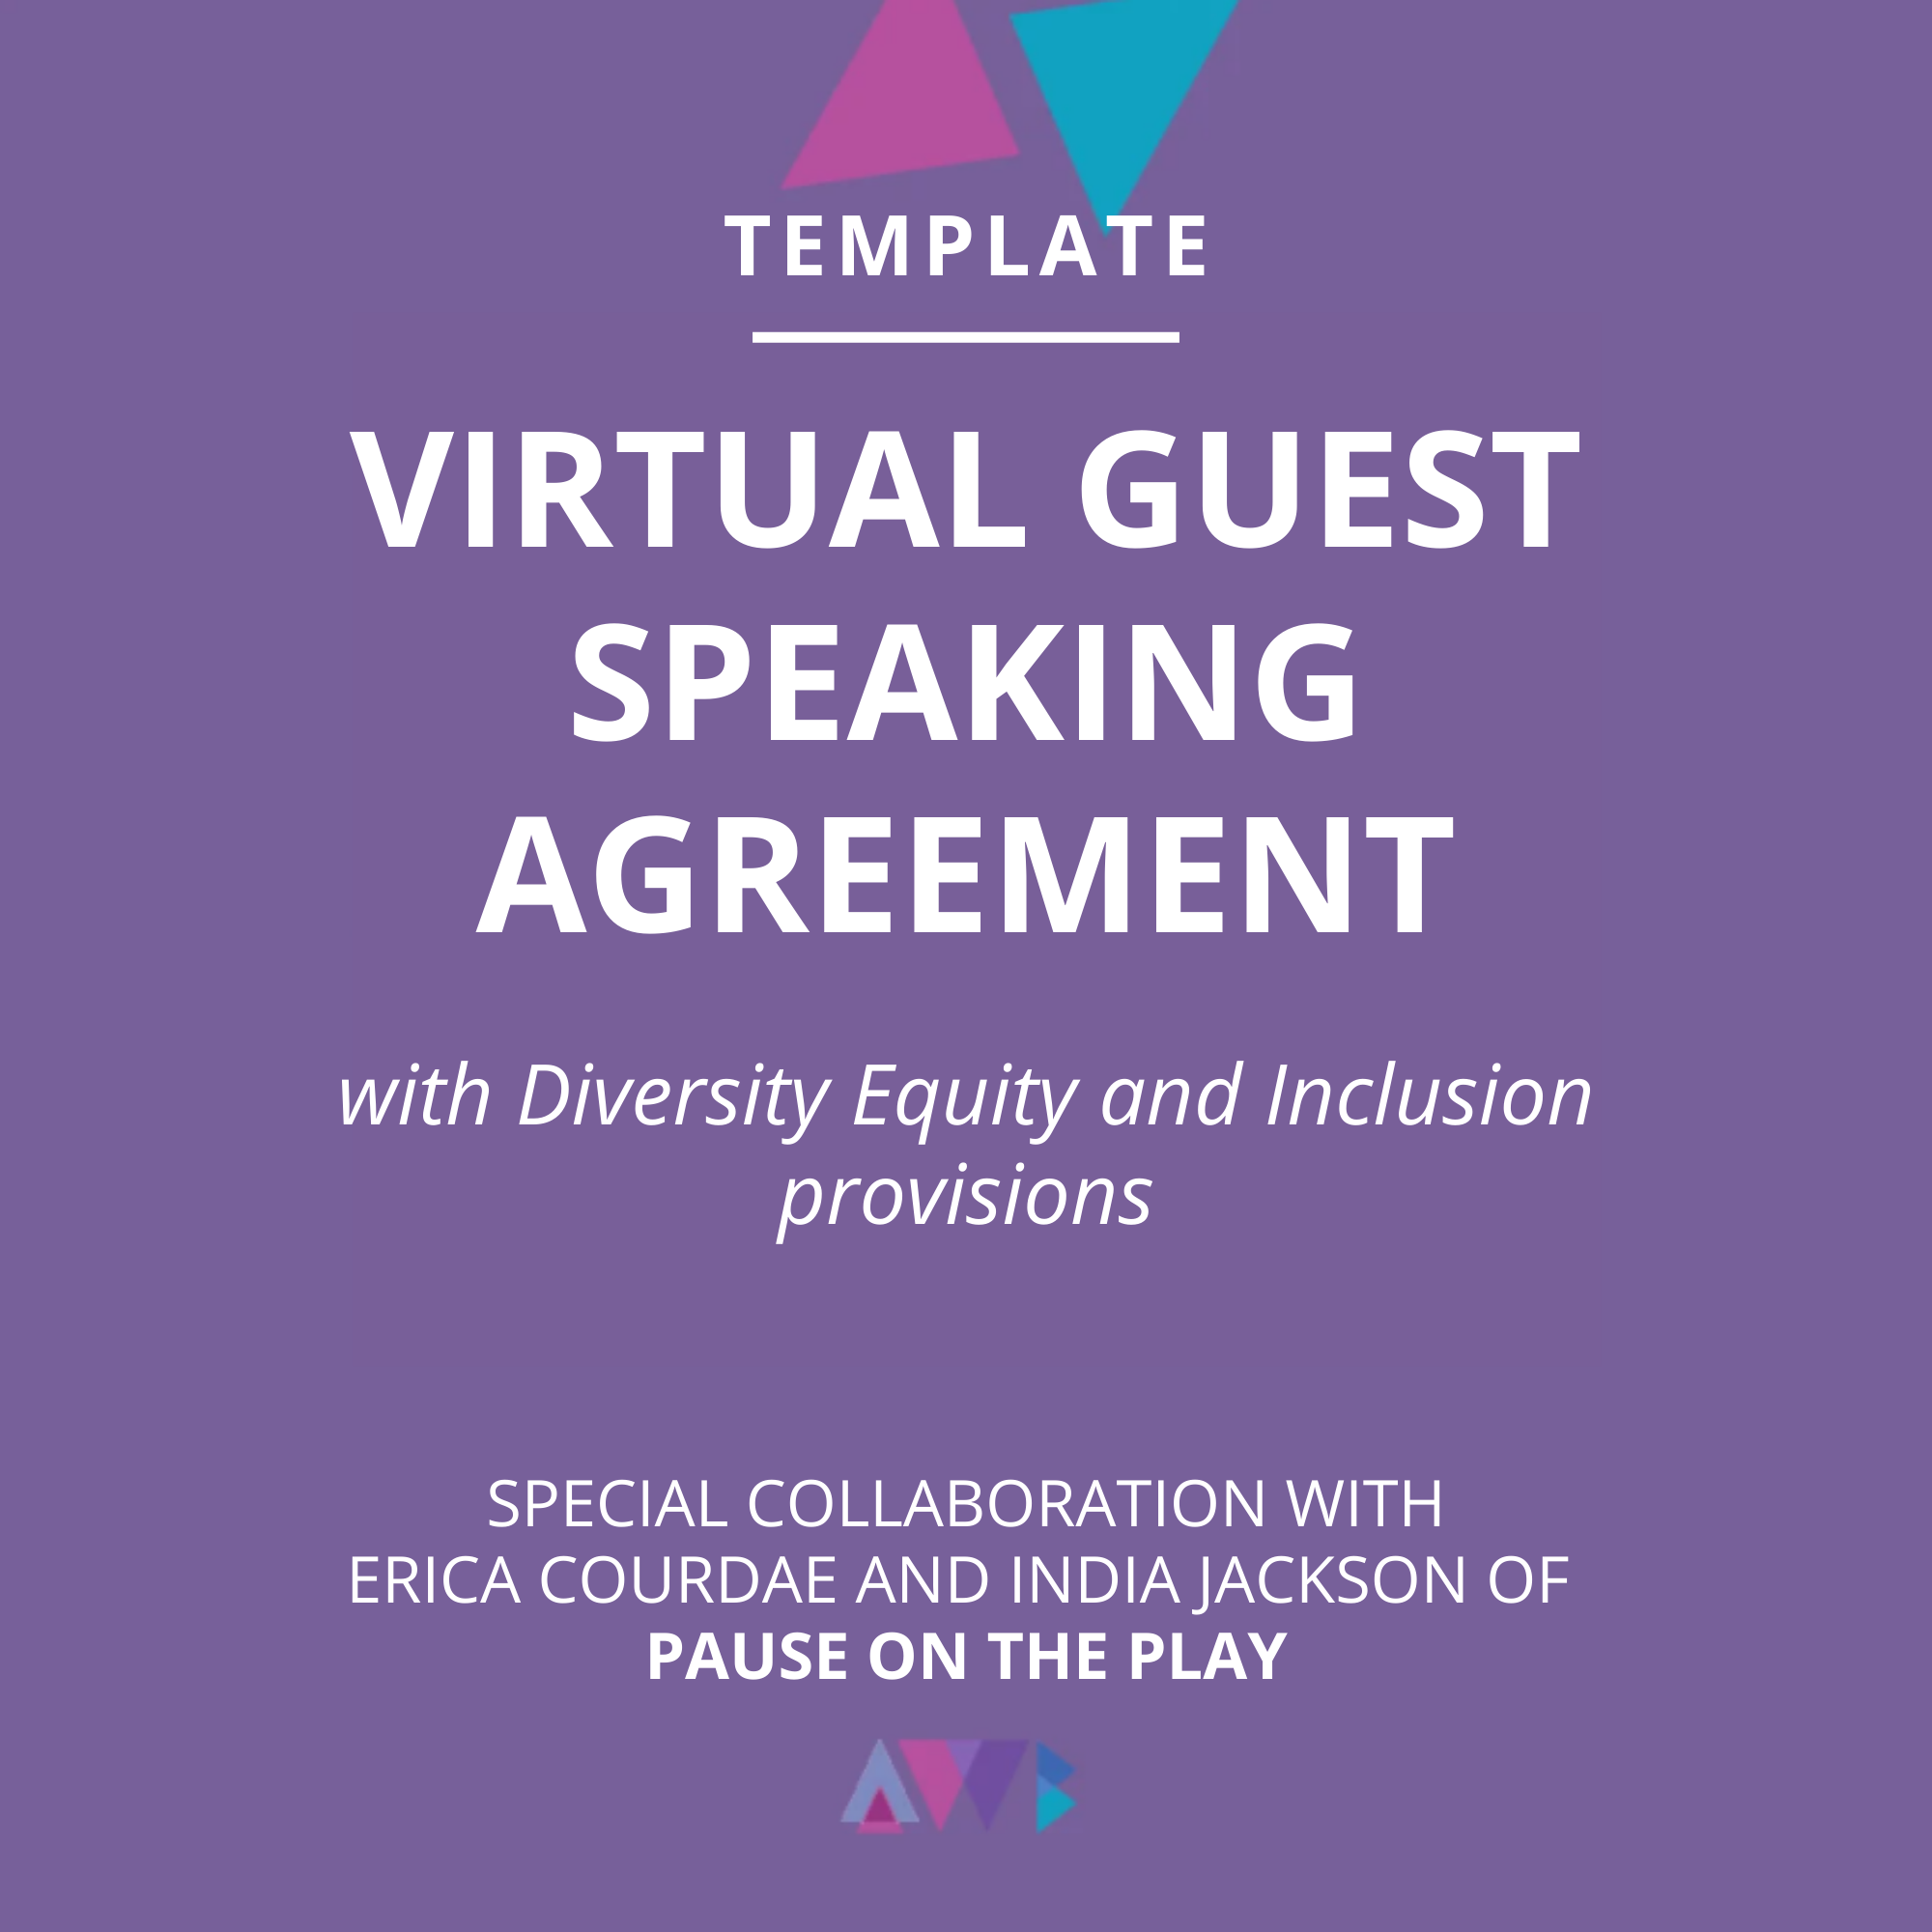 shortdes_For virtual event organizers inviting a speaker to participate